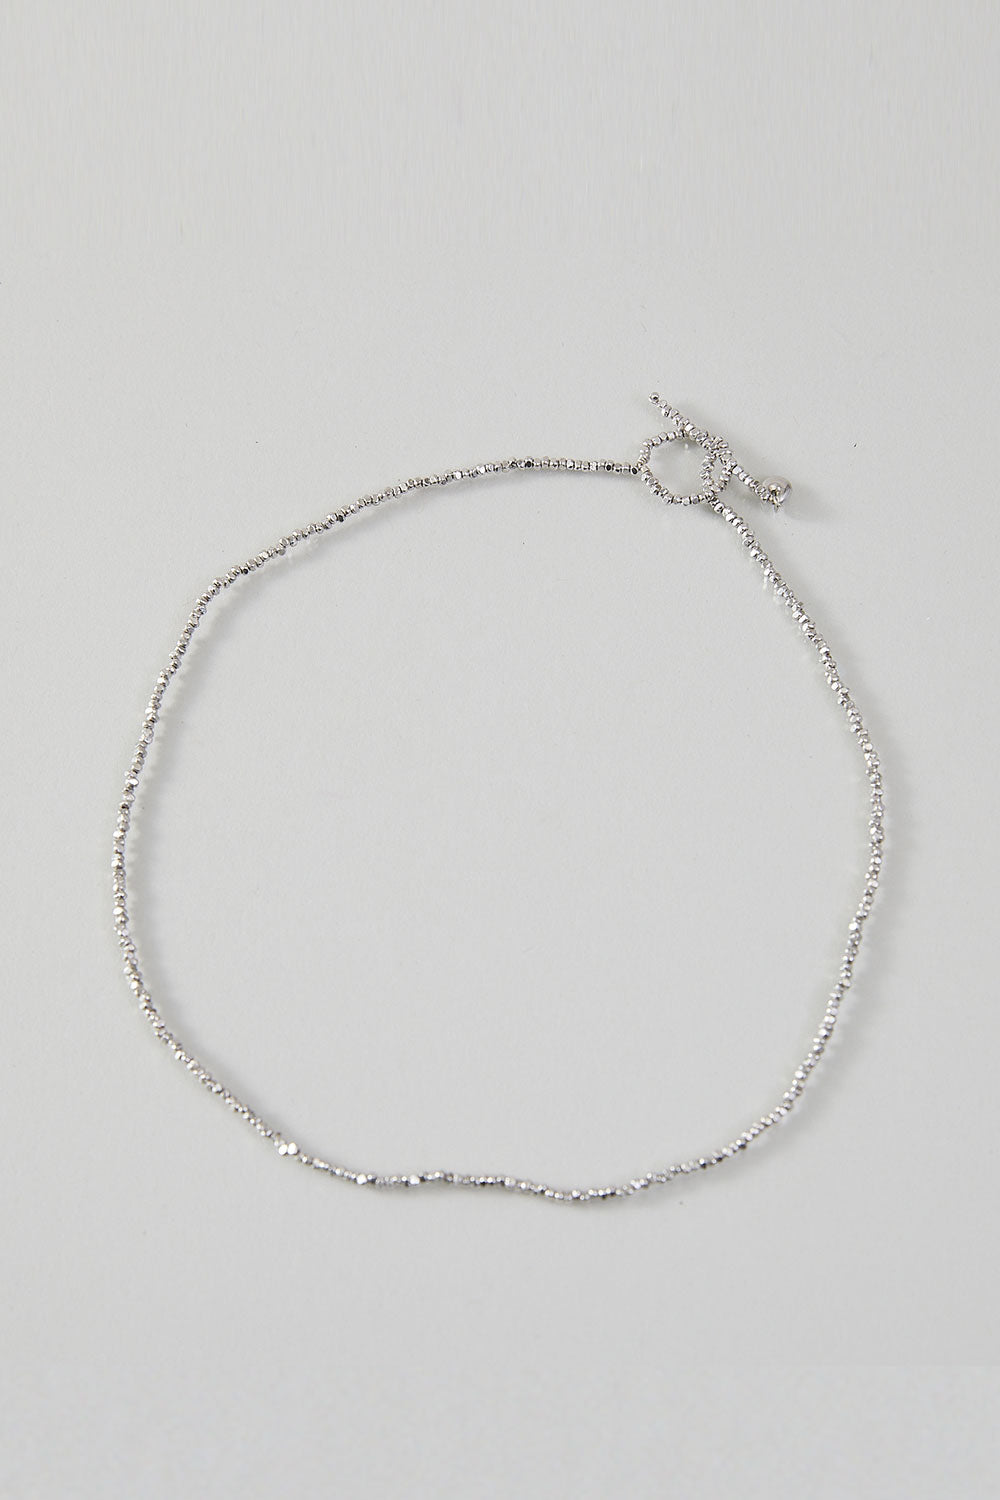 BEADS SHORT NECKLACE 39CM / Silver